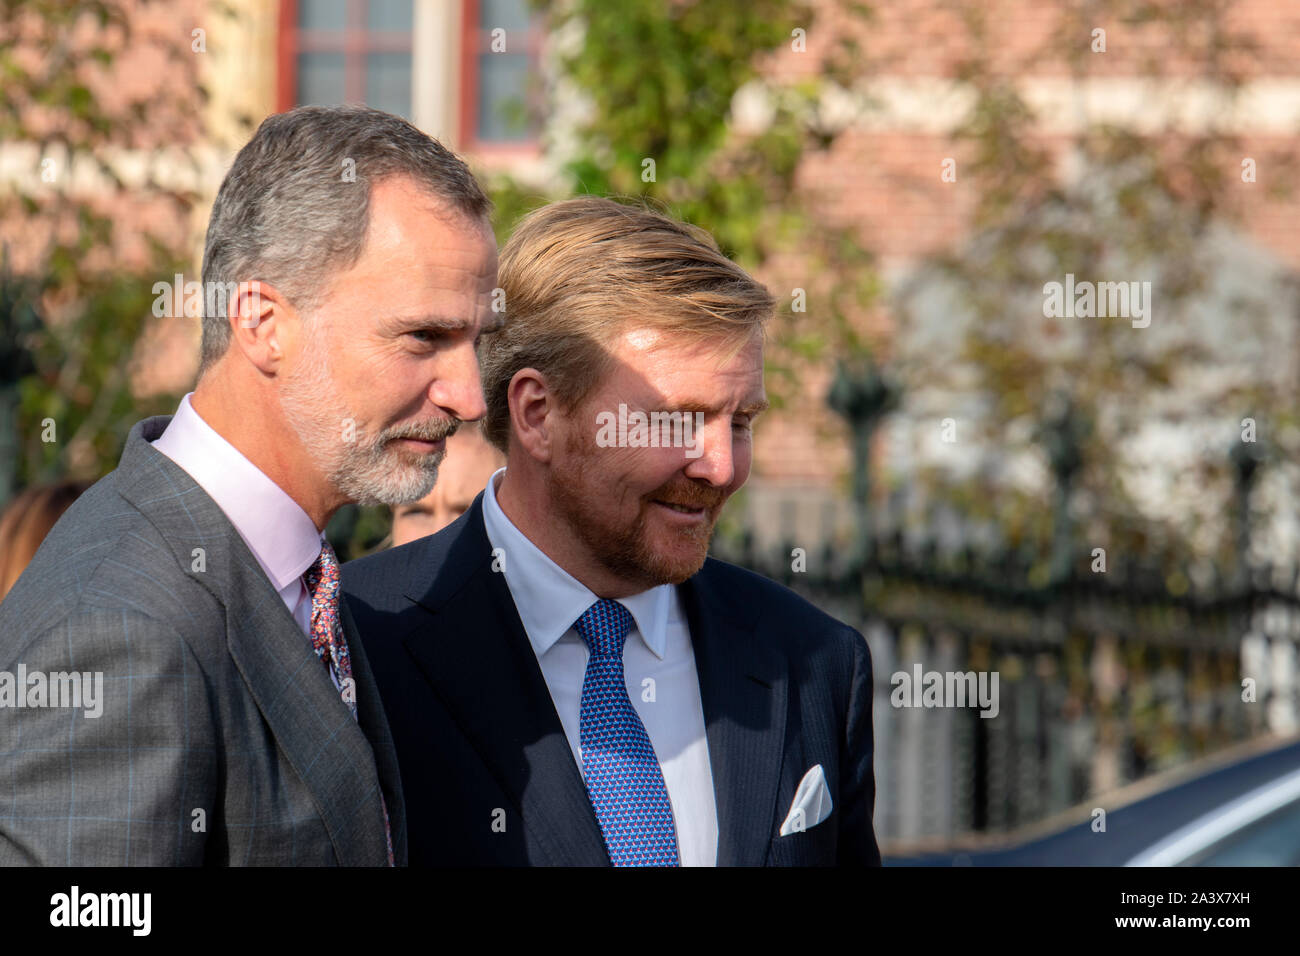 King Willem Alexander And King Felipe Saying Goodby After At The Rijksmuseum For The Rembrandt And Velázquez Exhibition At Amsterdam The Netherlands 2 Stock Photo